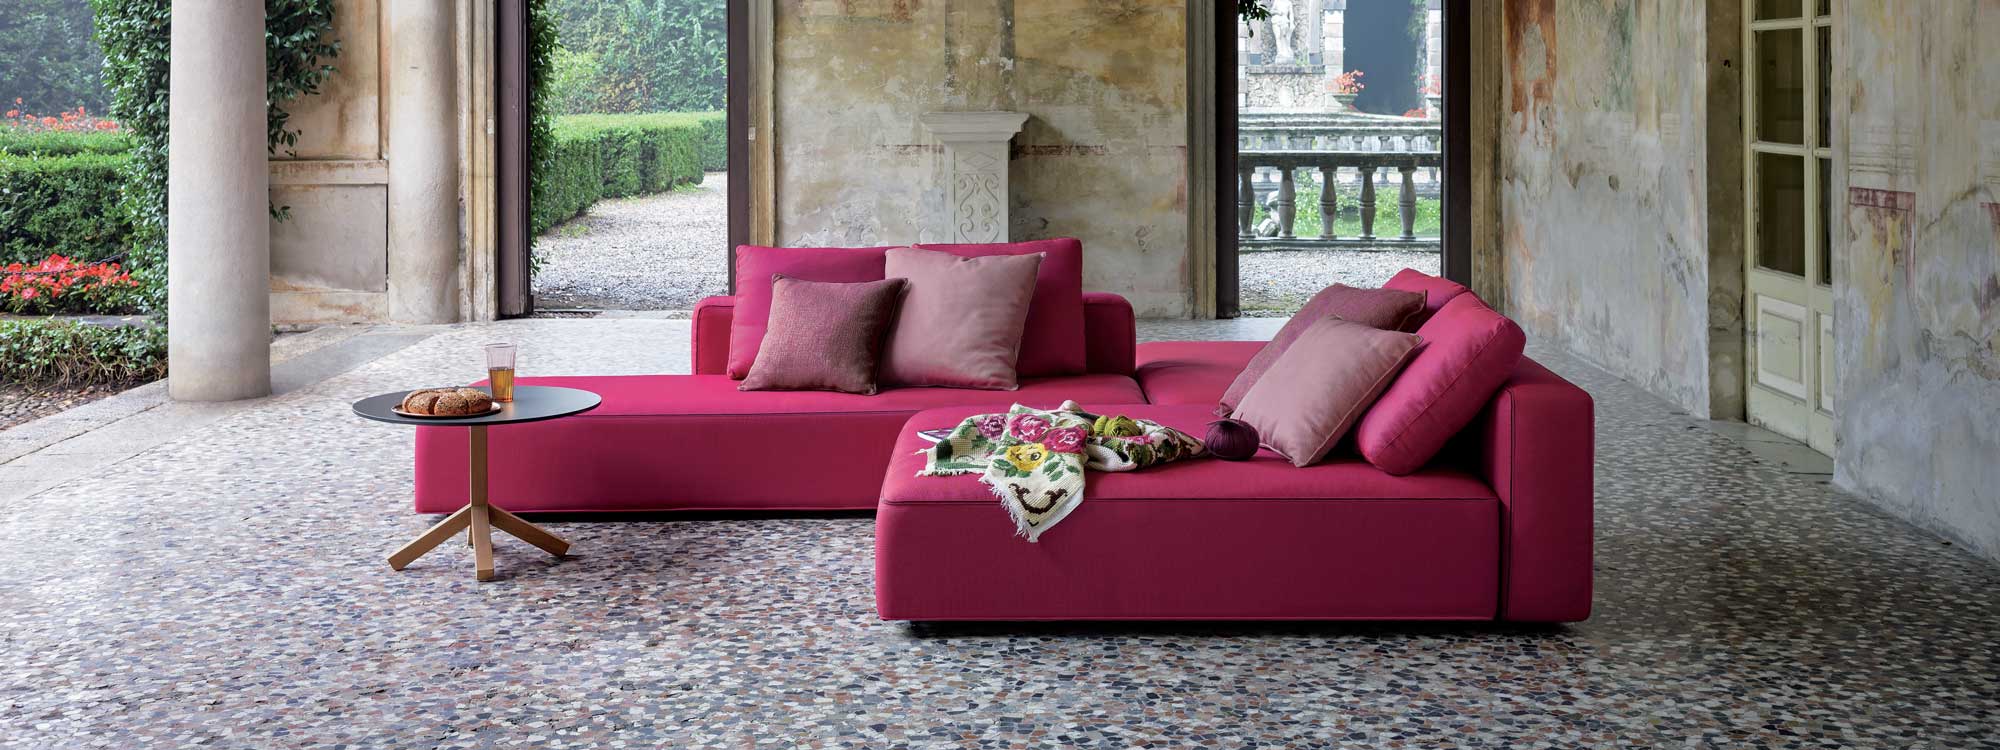 Image of Dandy pink garden sofa and daybed on mosaic floor within classical garden room